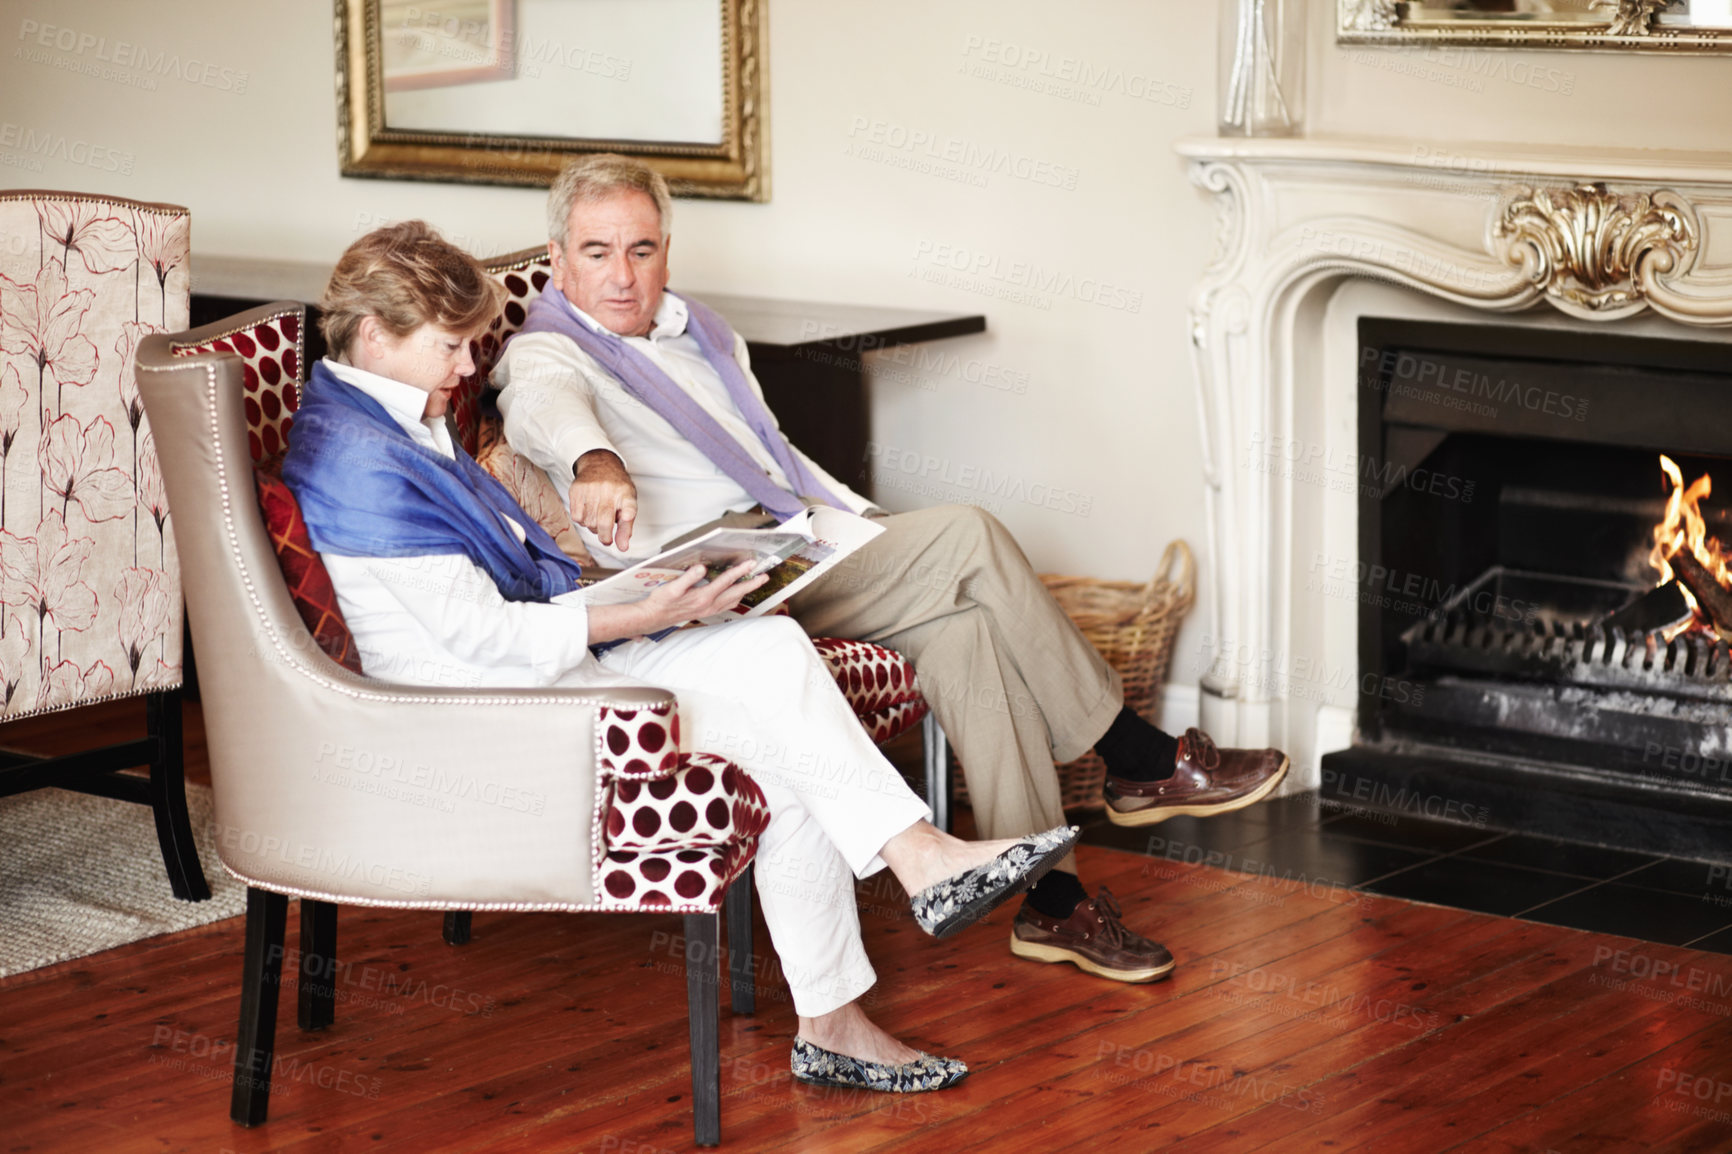 Buy stock photo Senior couple, relax and reading by fire place on holiday, retirement or vacation together at hotel or resort. Man and woman sitting with magazine or paper for news, deals or activities at house